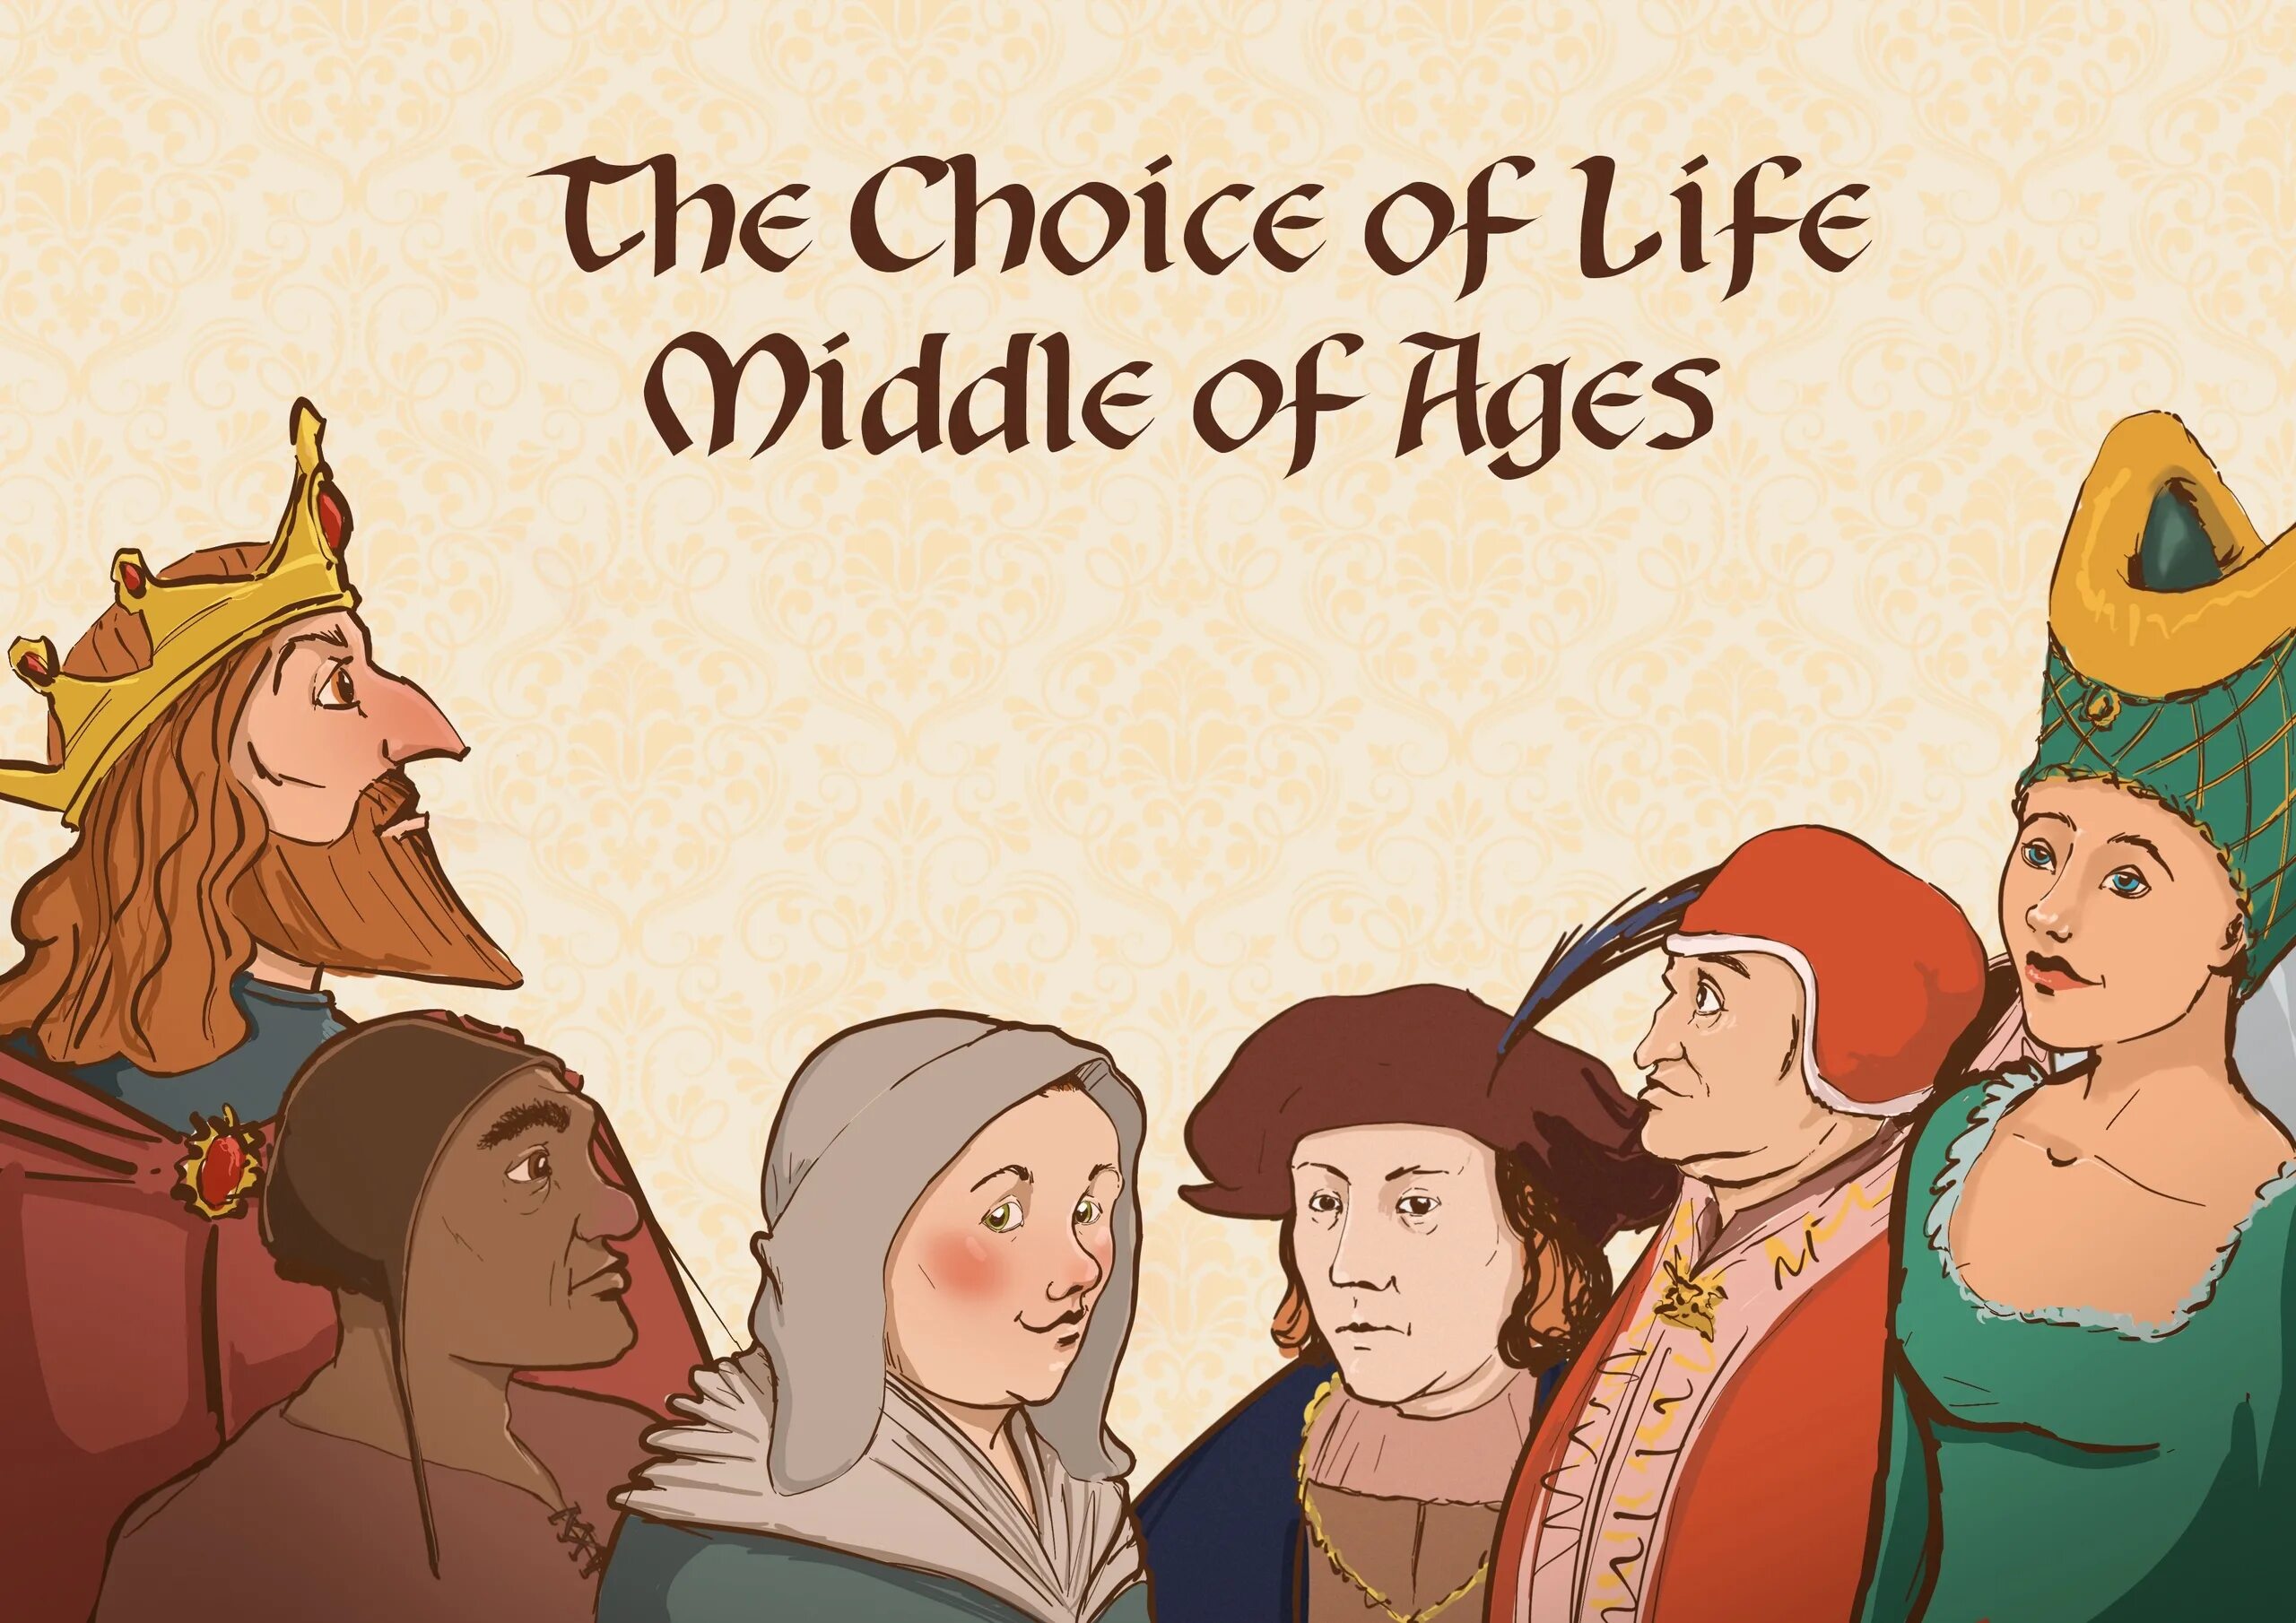 Middle ages 1. Игра the choice of Life Middle. The choice of Life Middle ages игра. The choice of Life Middle ages карта. Выбор жизни средние века.